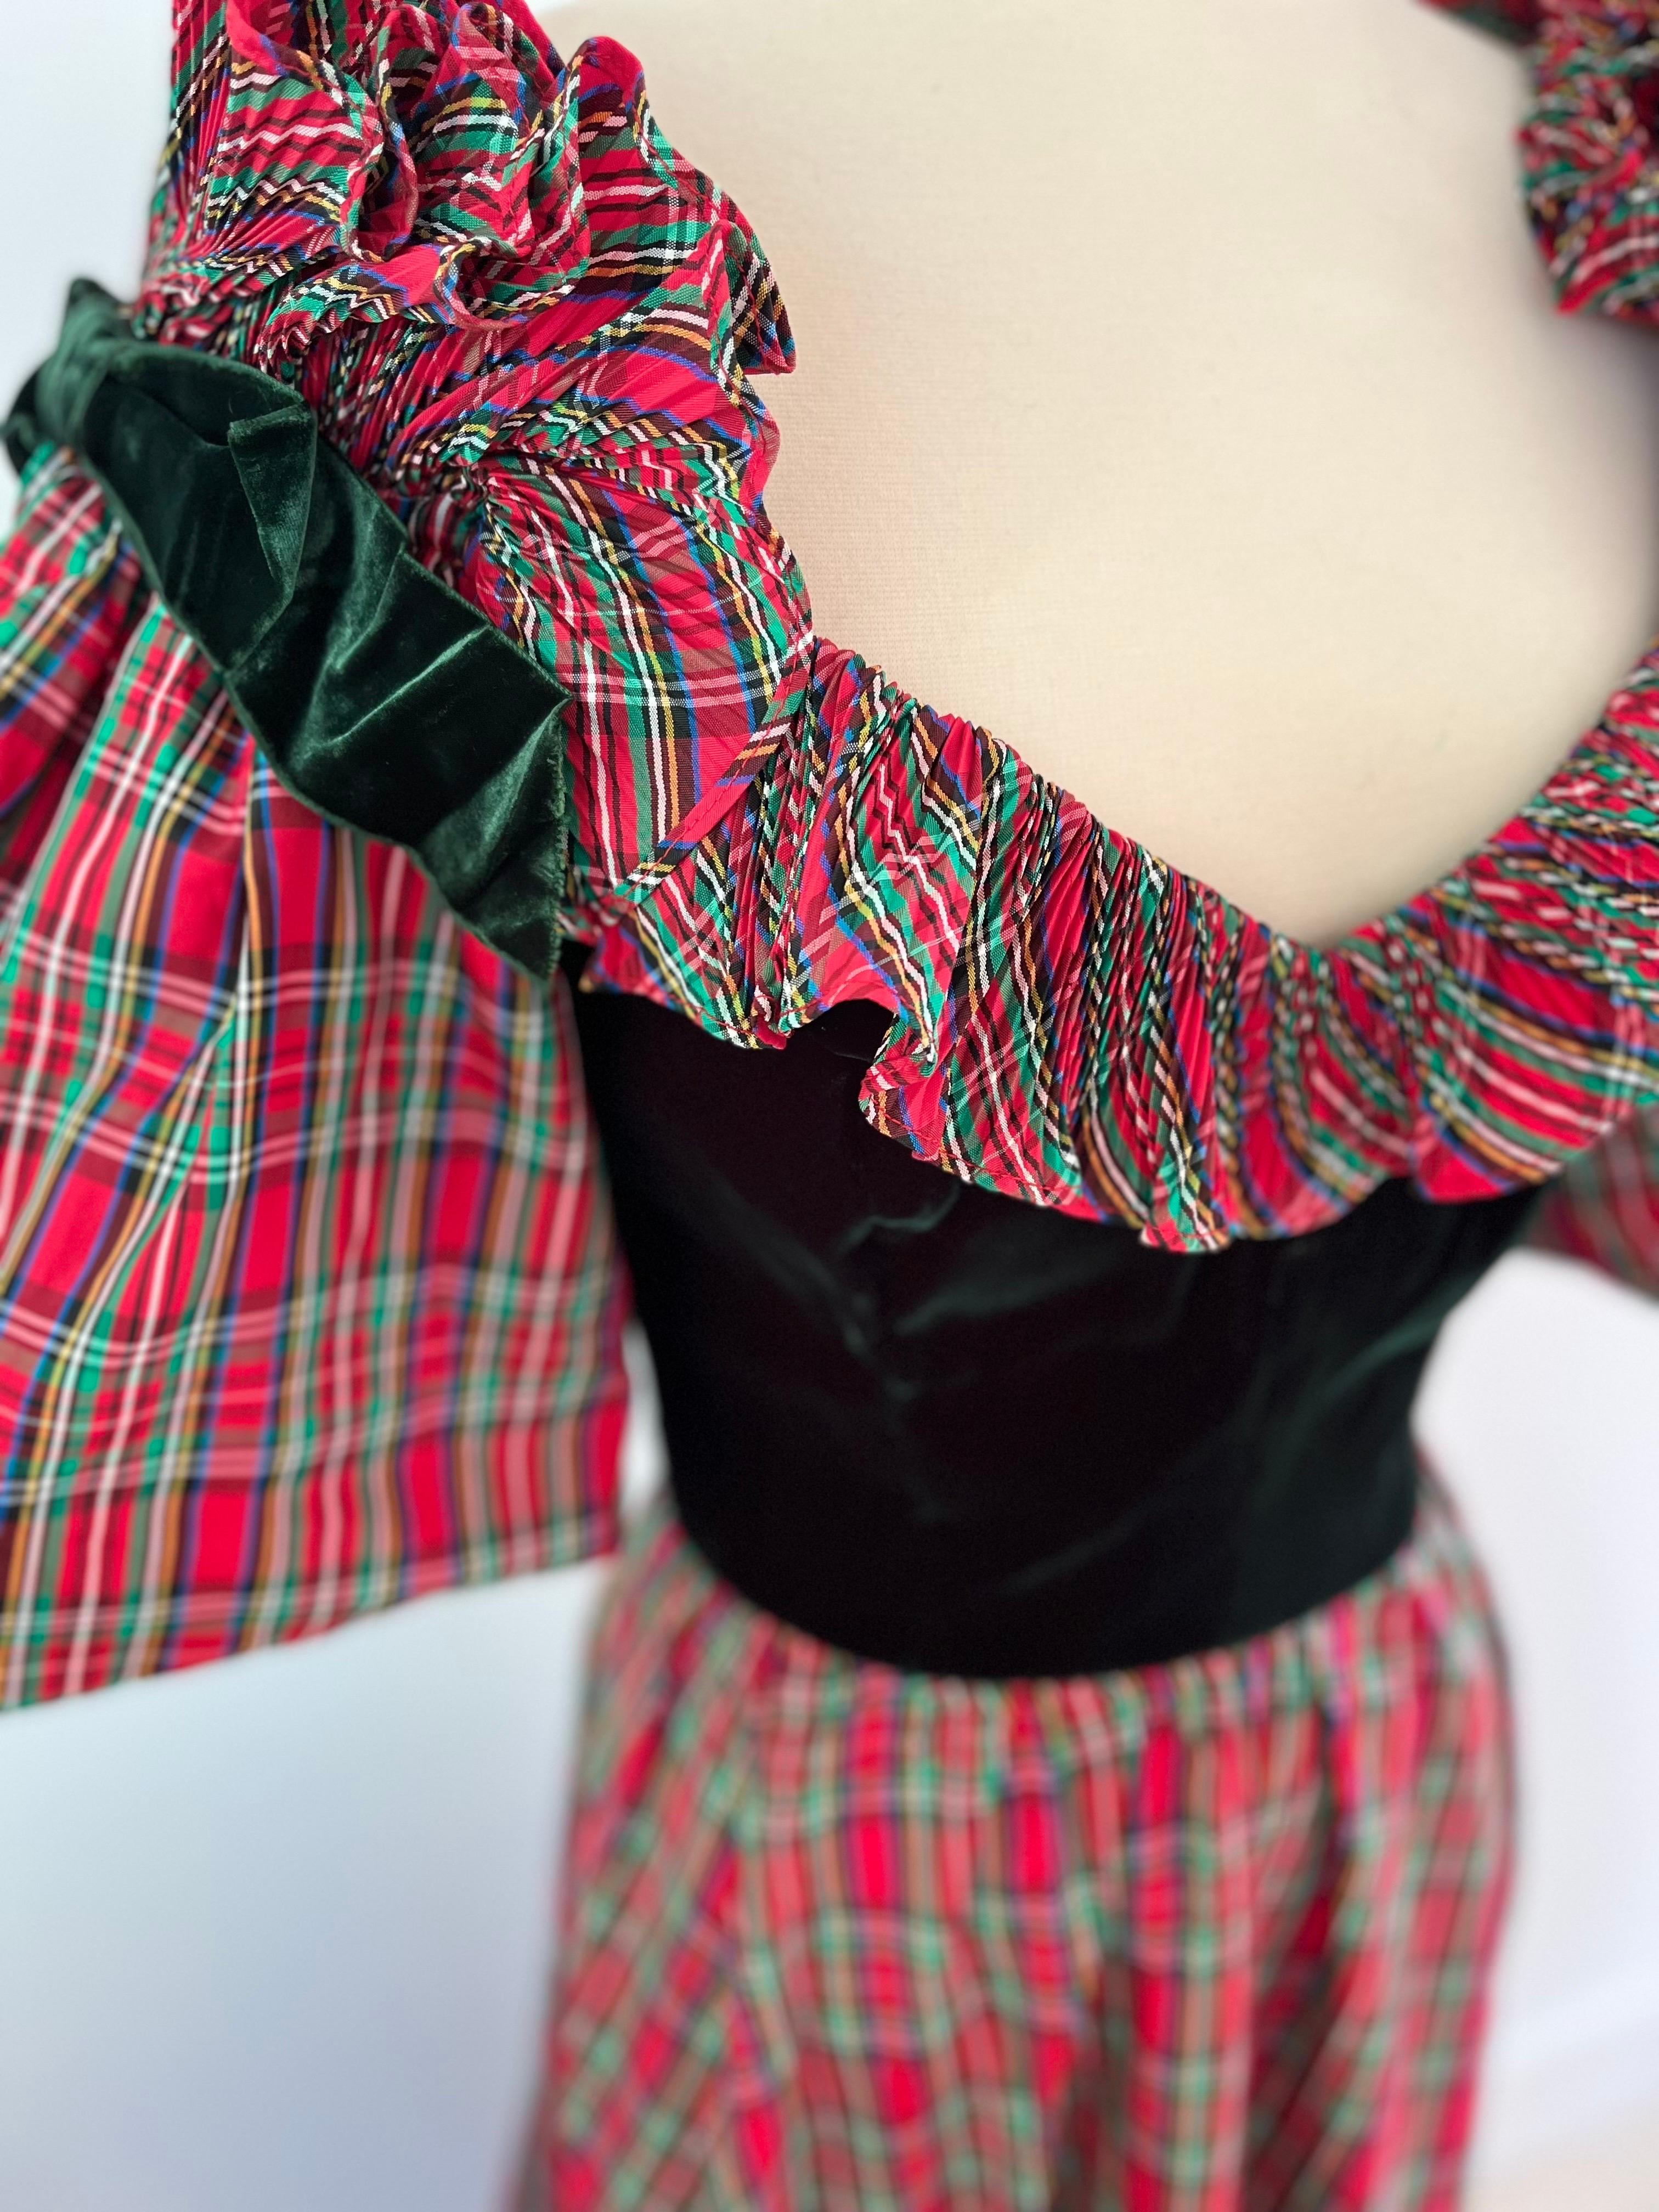 This dress is a holiday dream.  Like you stepped off the set of White Christmas.  A 1980s Victor Costa in red and green plaid taffeta with a full skirt and plisse ruffle hem at the bottom.  A dark forest green velvet fitted bodice  and big puff